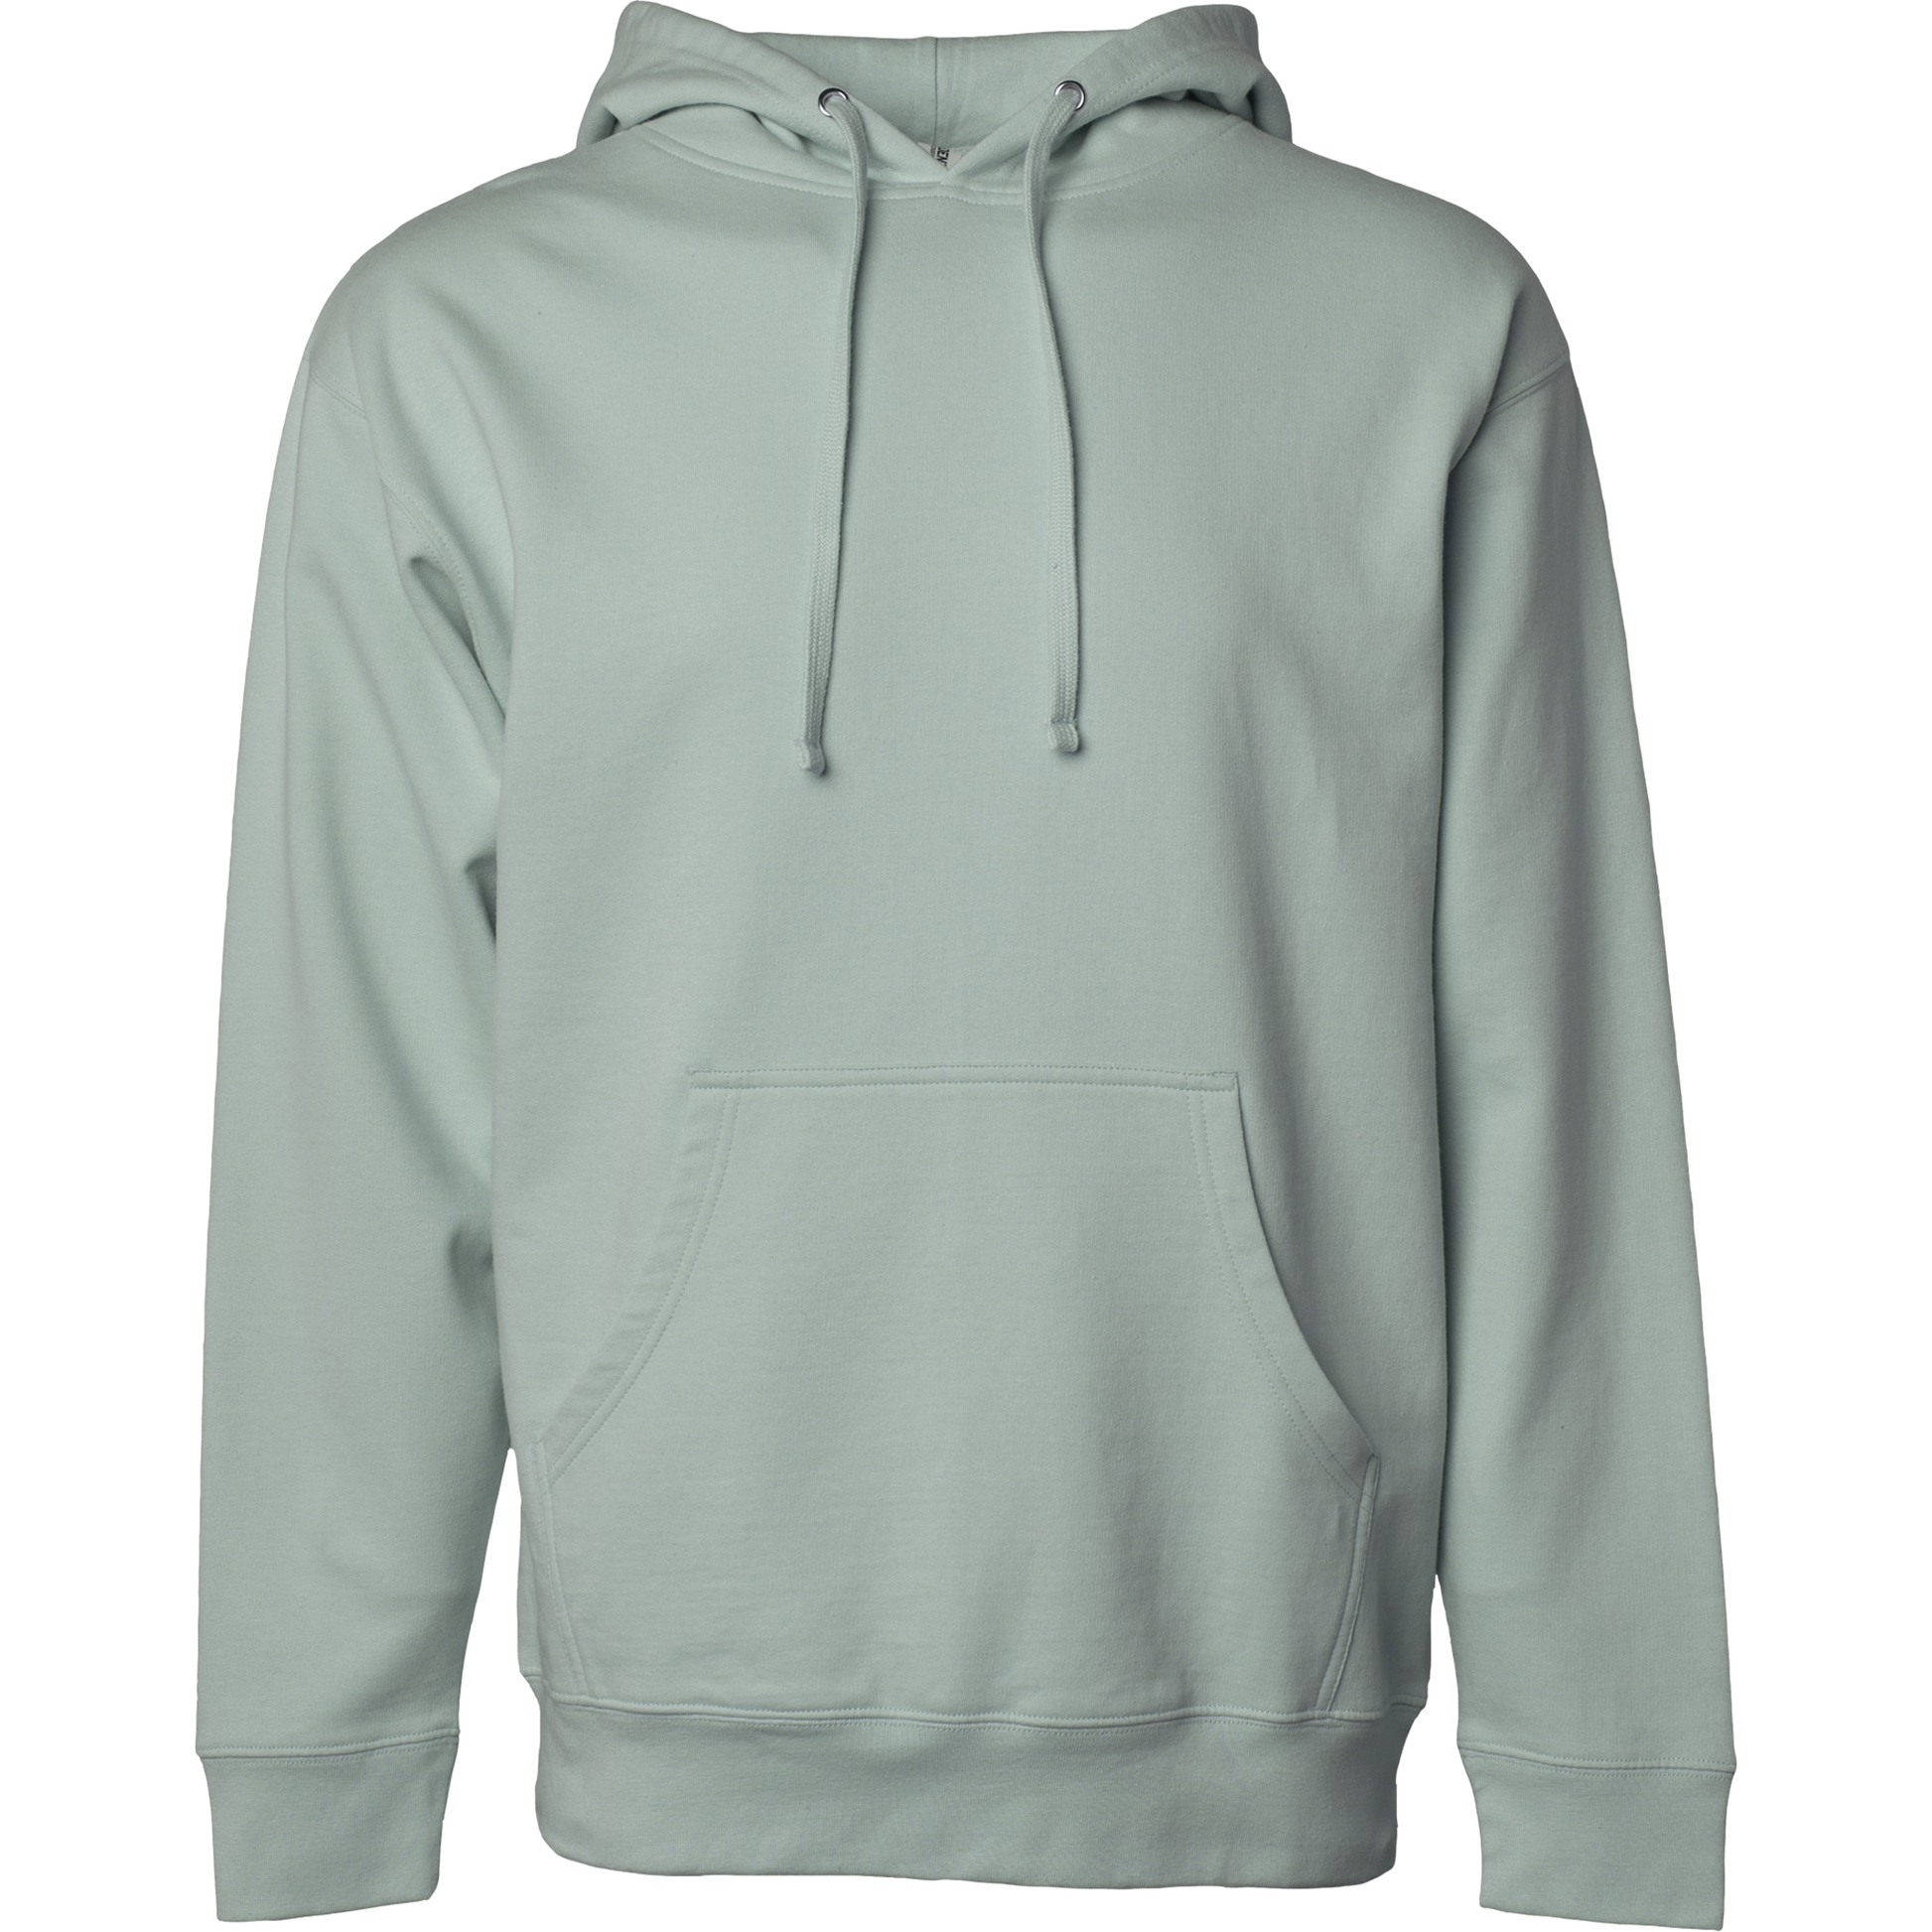 SS4500 Midweight Hooded Pullover Sweatshirt - Dusty Sage